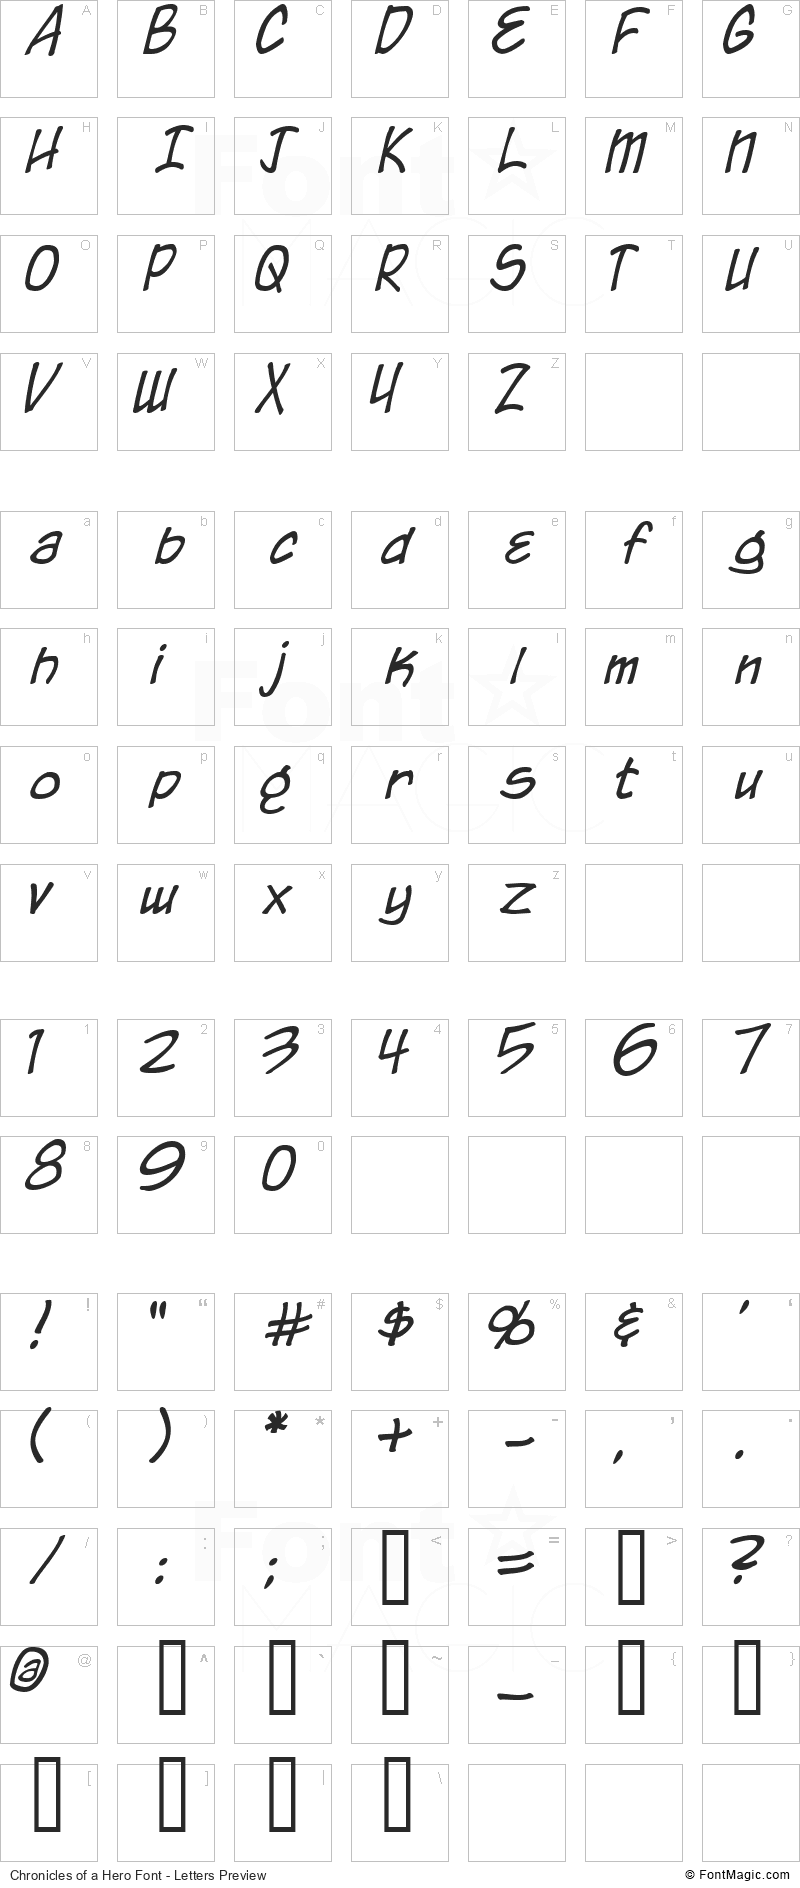 Chronicles of a Hero Font - All Latters Preview Chart